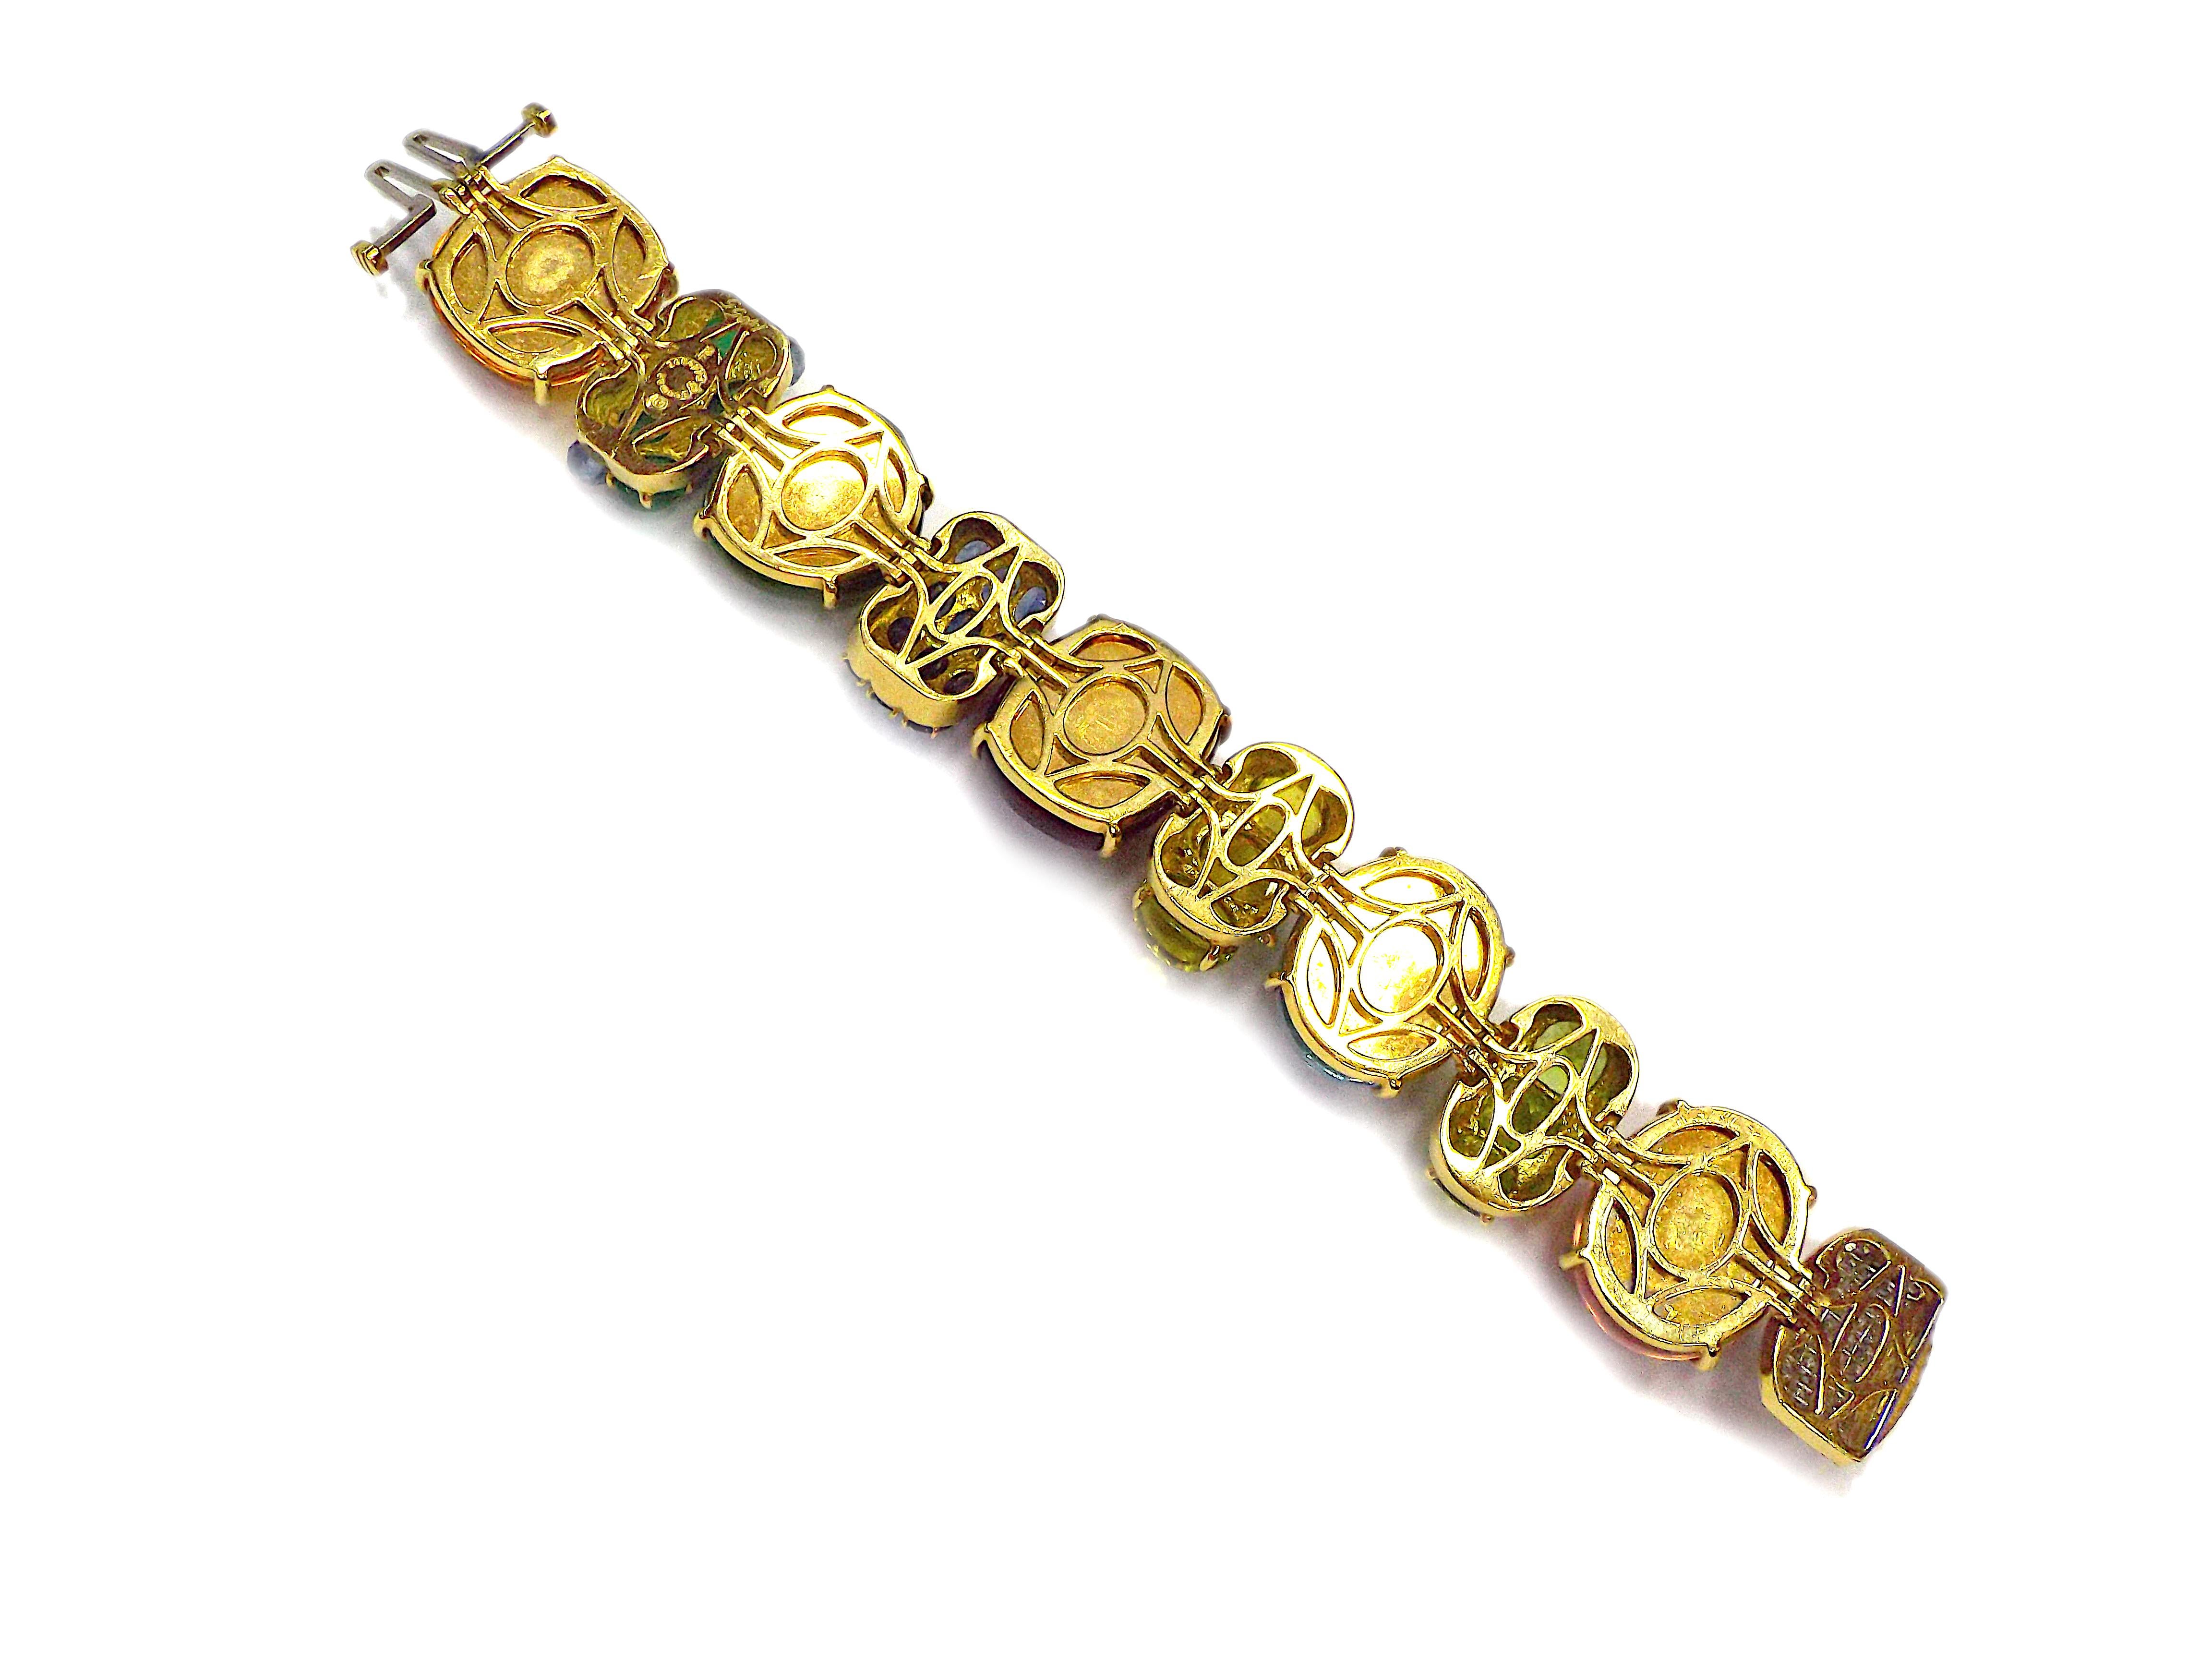 A fantastic multi gemstone bracelet by Seaman Schepps from Rio collection. Featuring sapphires, emeralds, rubies, peridots, citrines, rose quartz, tourmalines, topaz, aquamarines and diamond stones, mounted in 18K yellow gold. The length is 7